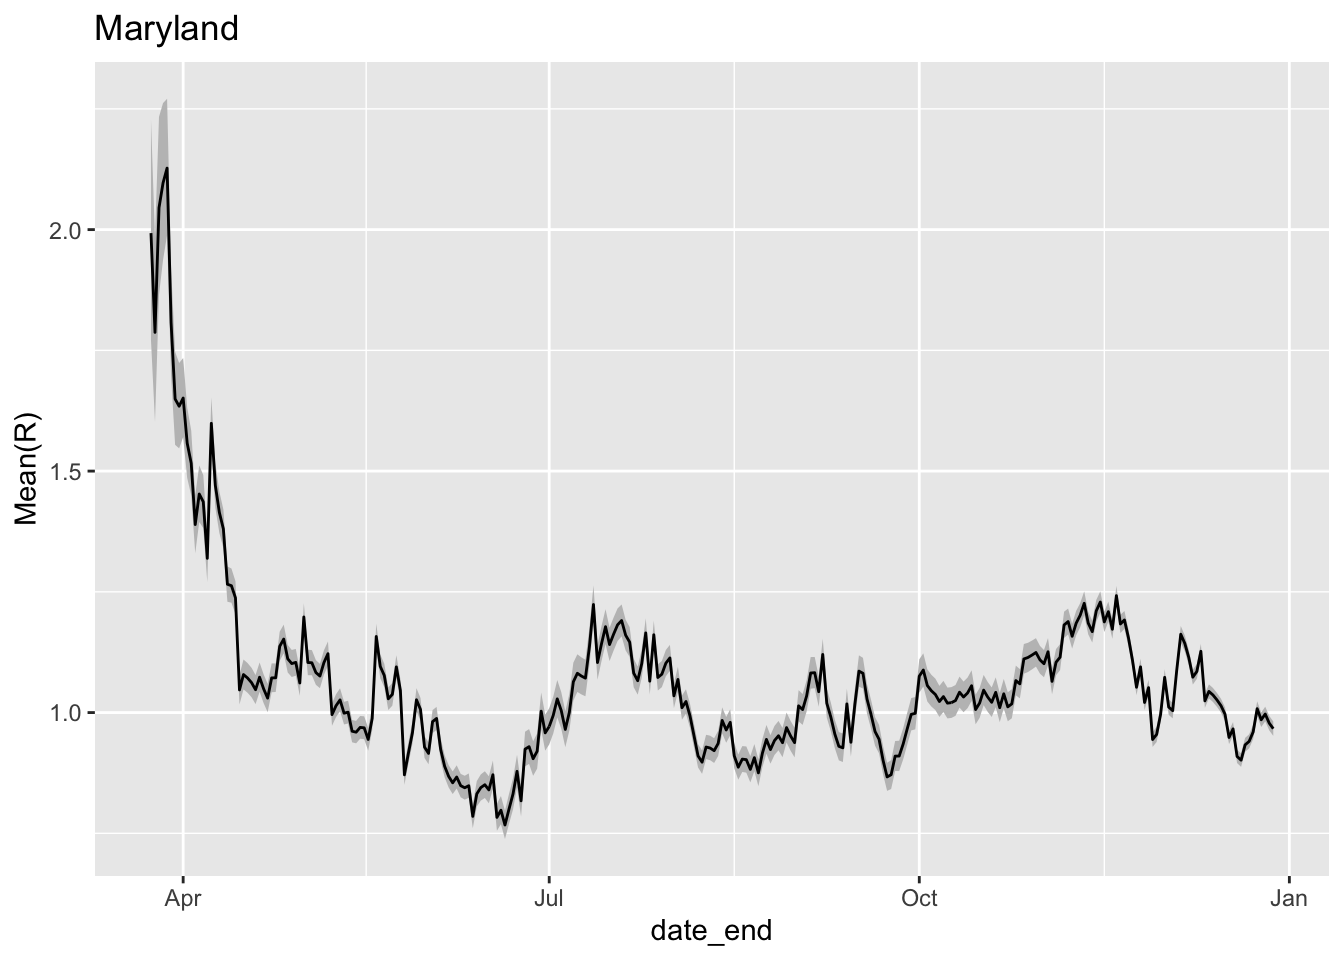 Estimate of R_0 over time in Maryland. The grey coloring represents 95% confidence intervals around the estimate of R_0.